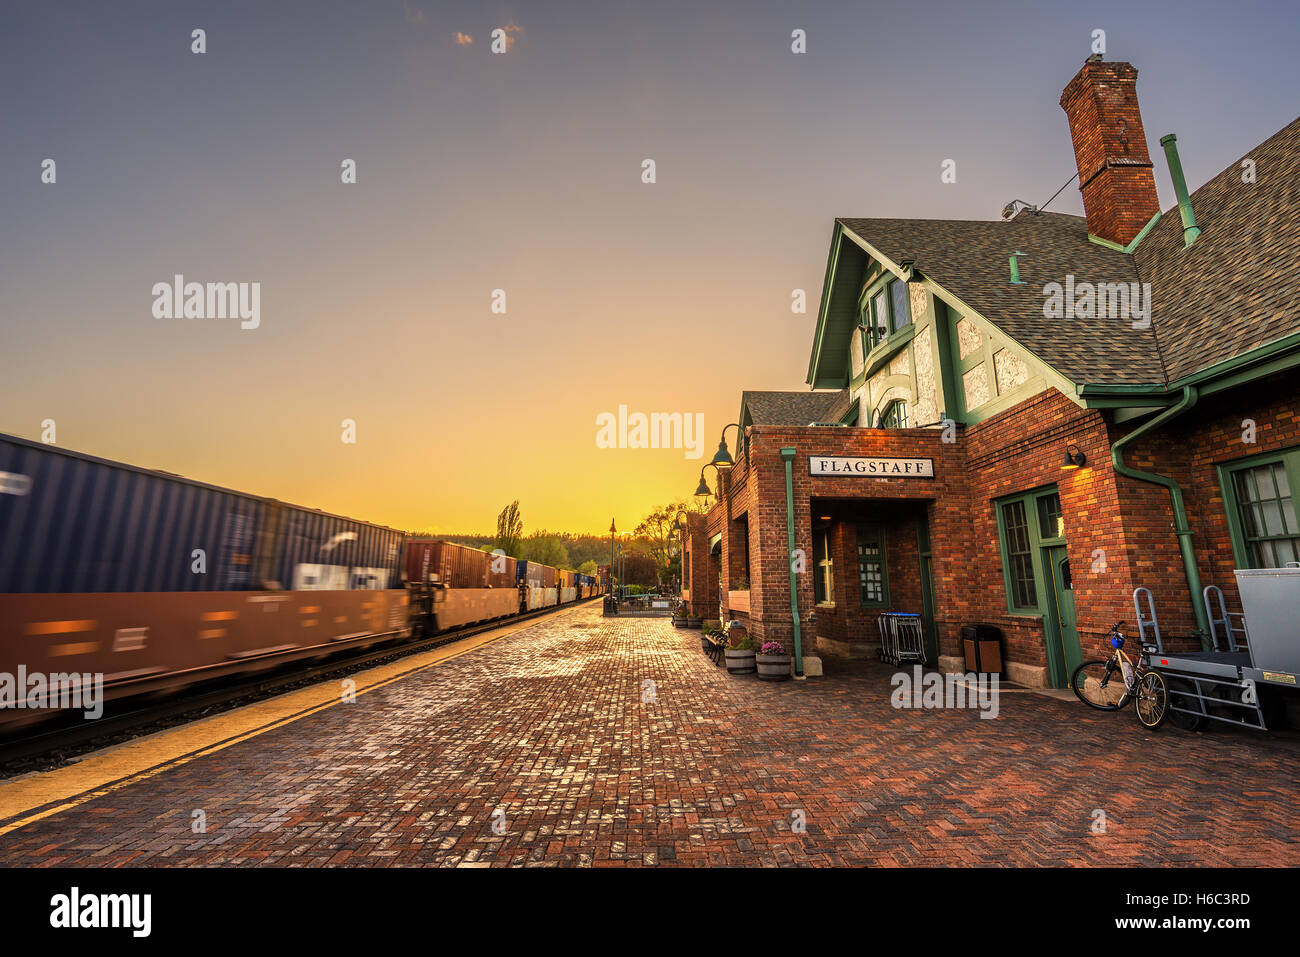 Amtrak Train going through the historic train station in Flagstaff at sunset. This station is located on the historic Route 66. Stock Photo